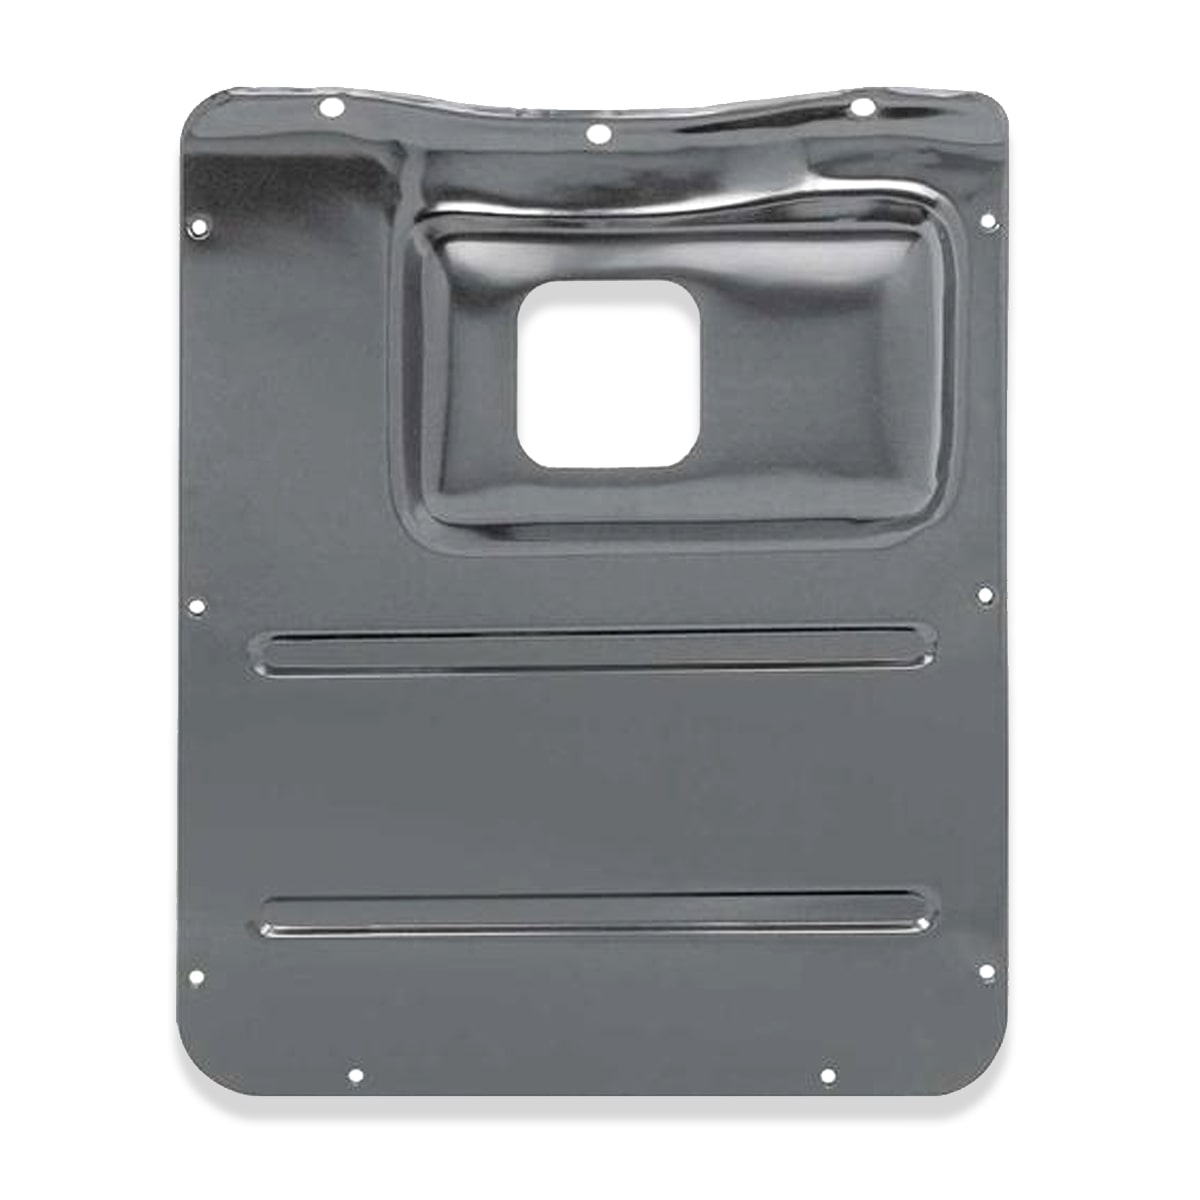 1948- 1955 Transmission Floor Cover Plate 4 Speed Fiberglass Chevrolet and GMC Pickup and Big Truck